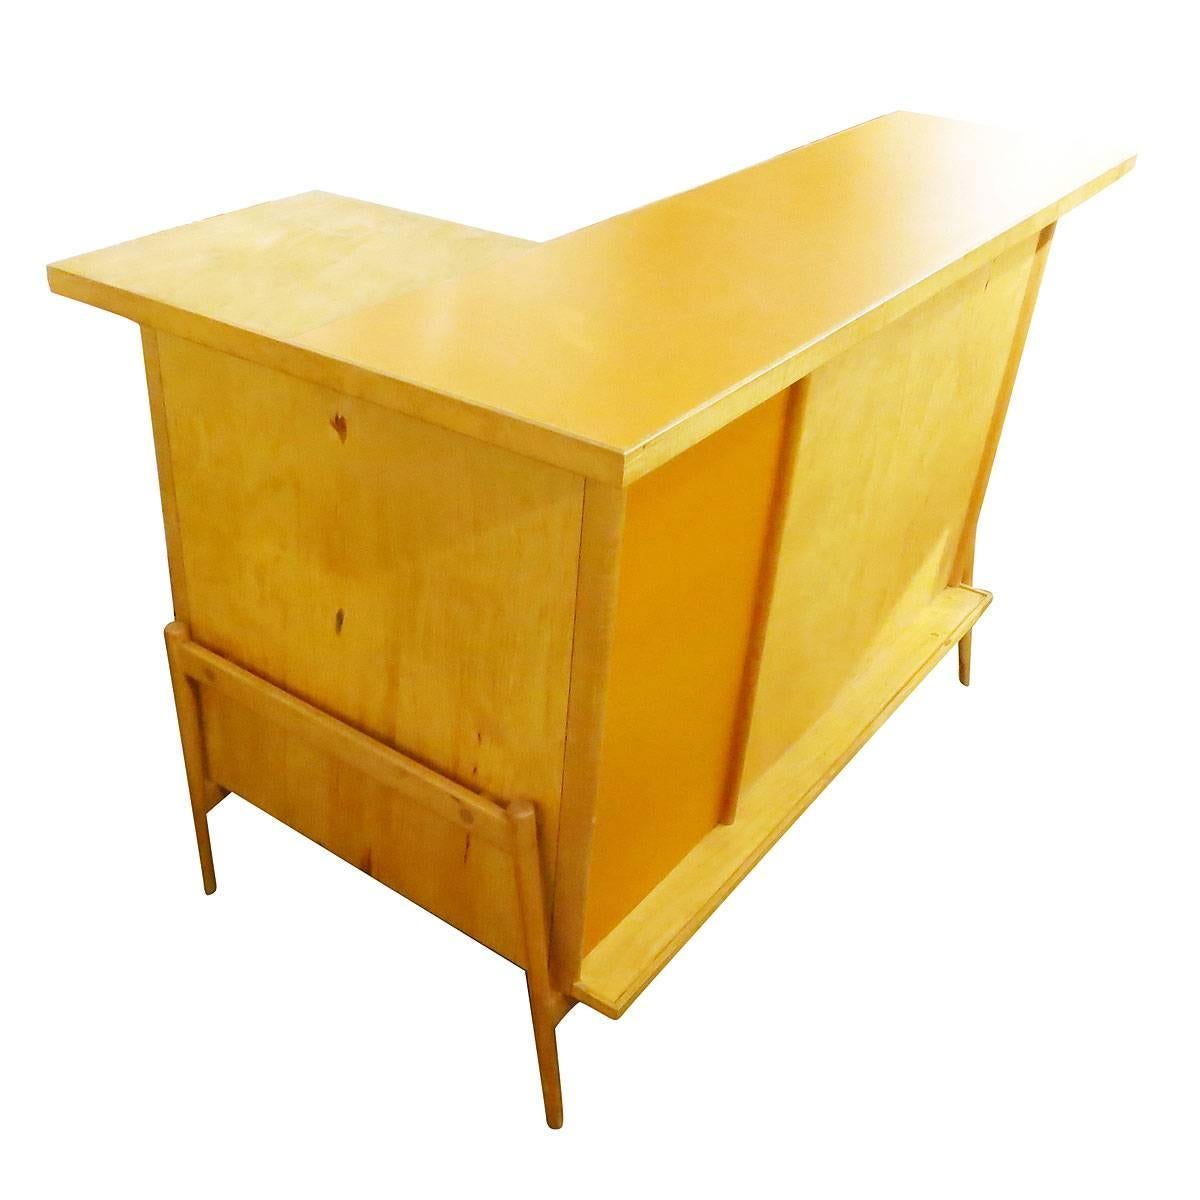 This Mid-Century Modern blond bent plywood bar circa 1950 comes with three matching bar stools. The Classic standing bar features an asymmetrical pale orange inset panel on the front. Behind the L-shaped unit there is plenty of storage for bottles